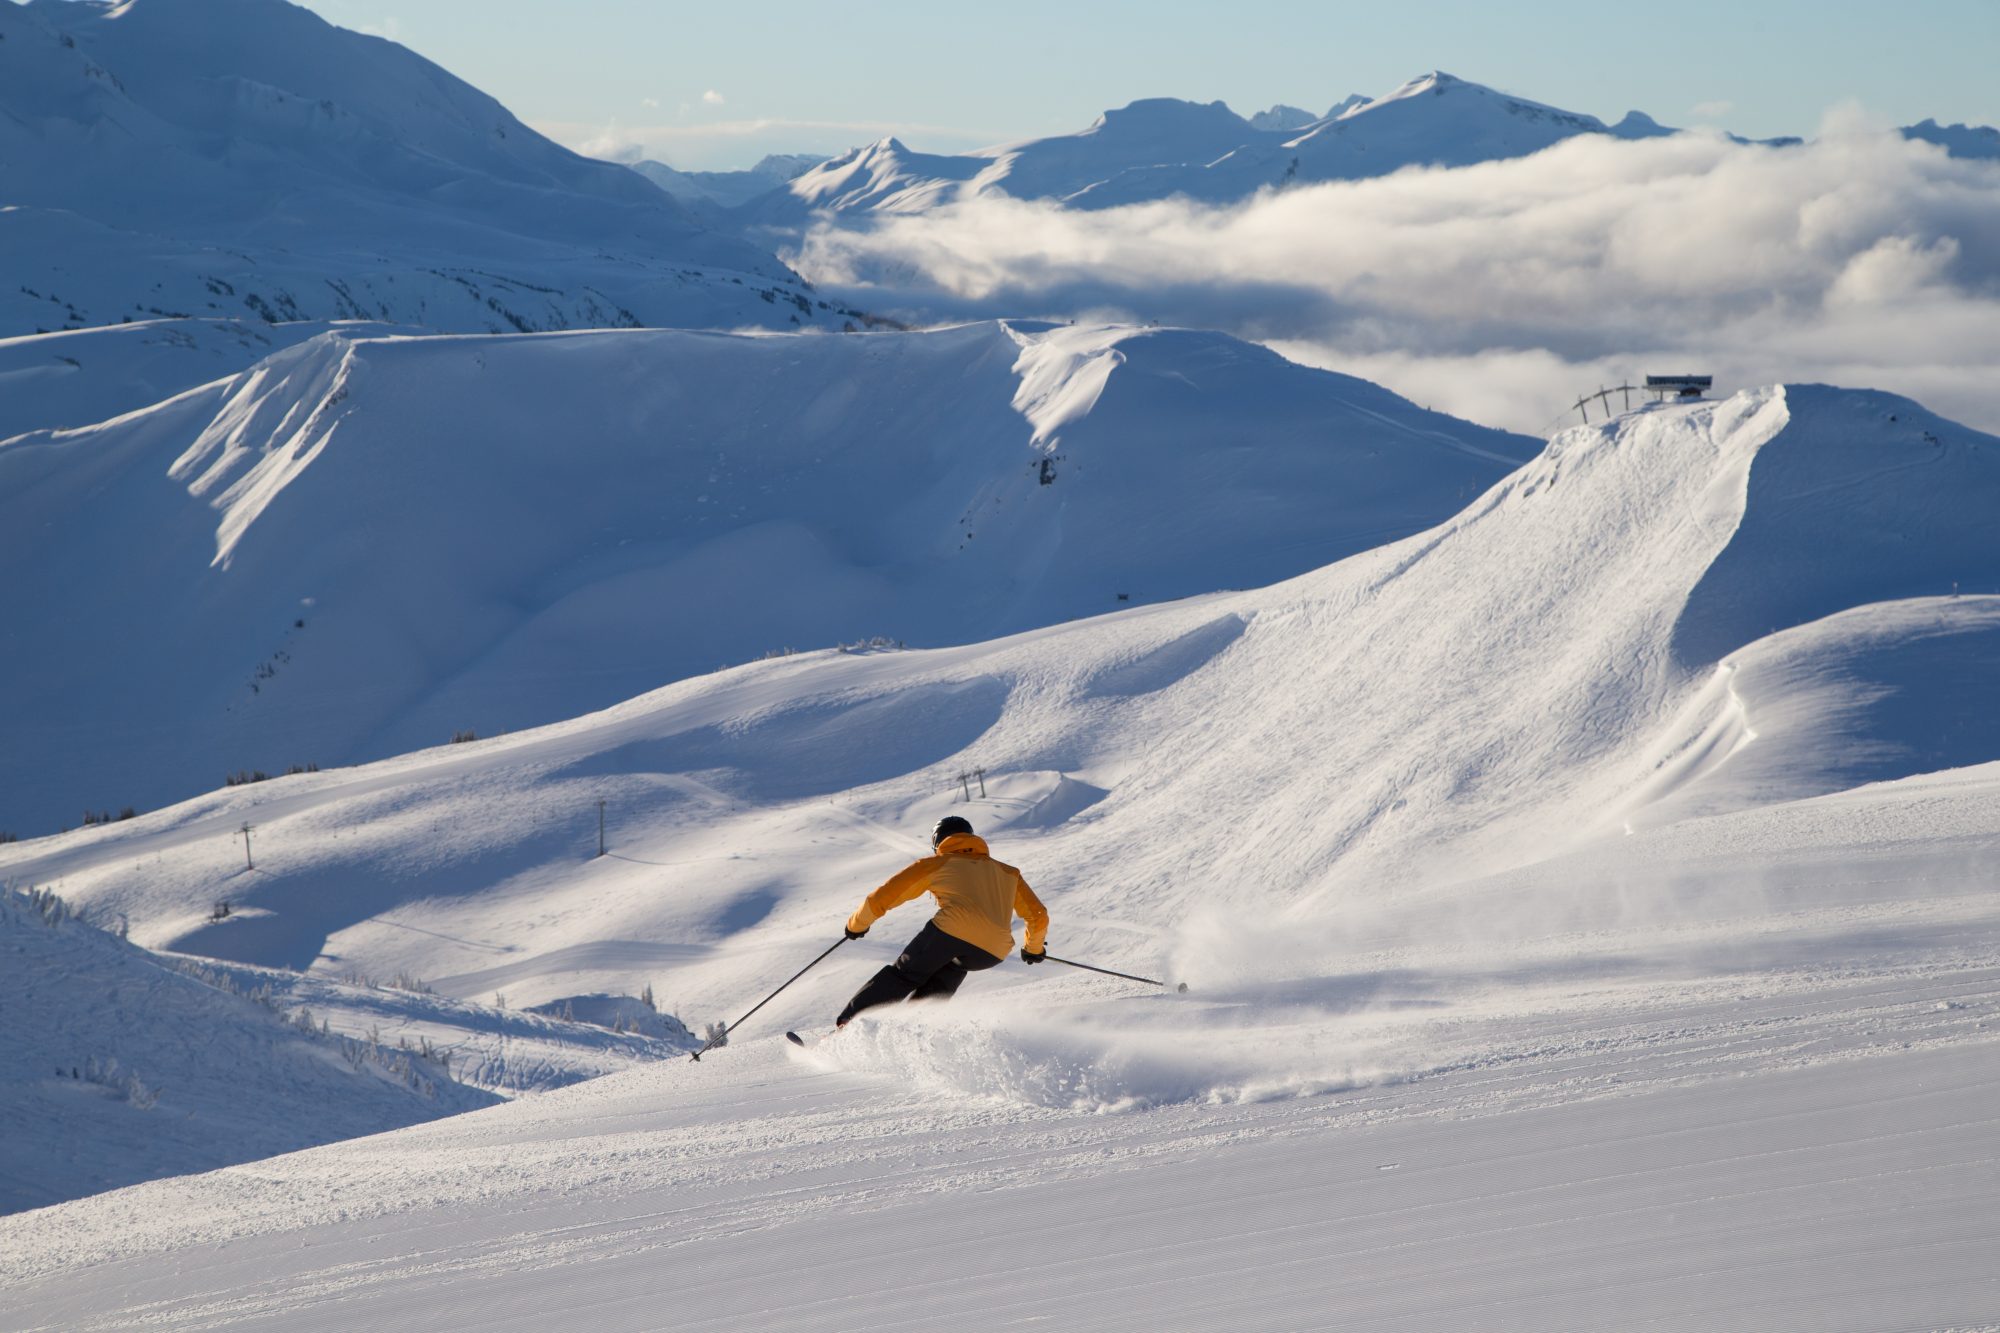 Mike skiing in the Burnt Stew Basin with the Symphony Chair. Paul Morrison photo. Whistler, Vail Resorts. Epic Pass expands European Access in World-Class Resort in France and Italy: Les 3 Vallées in France and Skirama Dolomiti Adamello Brenta in Italy. 